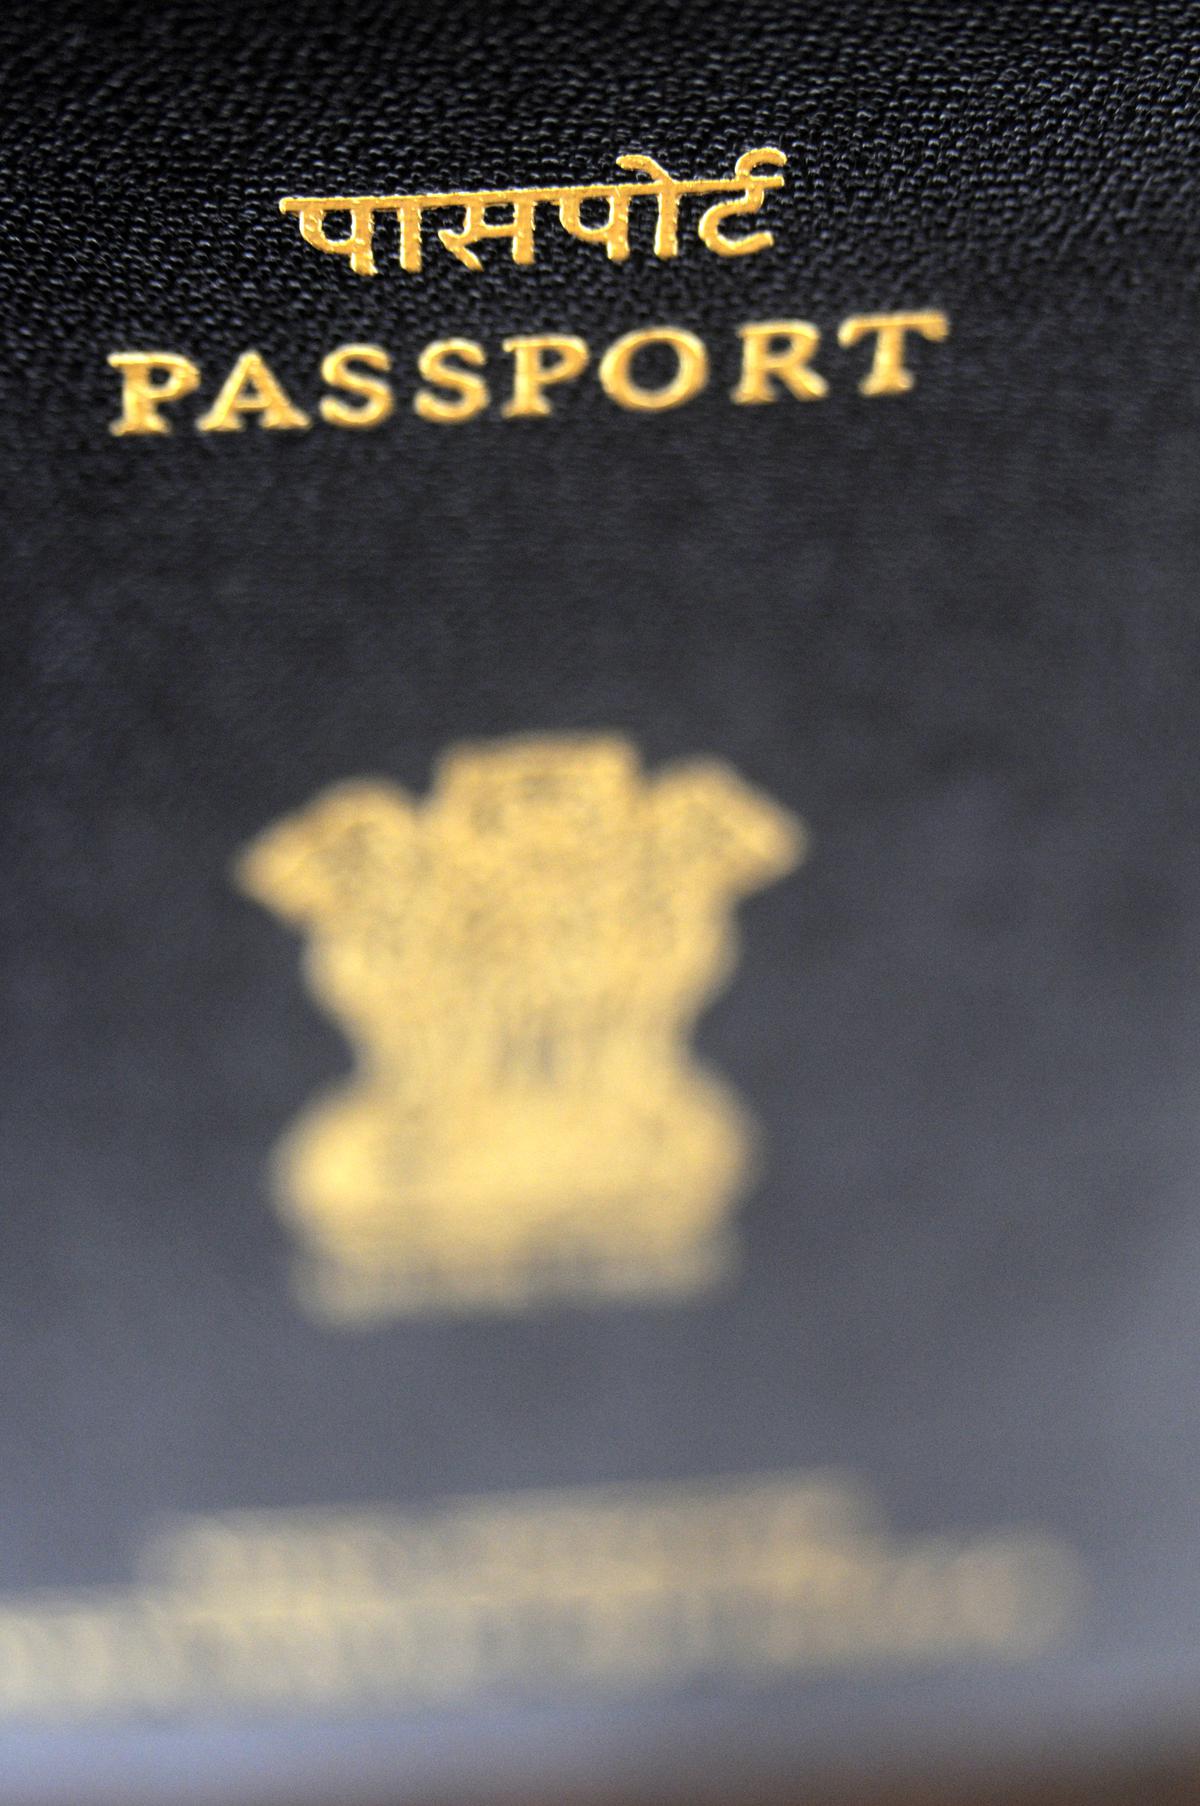 Indians exempted from police clearance certificate for Saudi visa